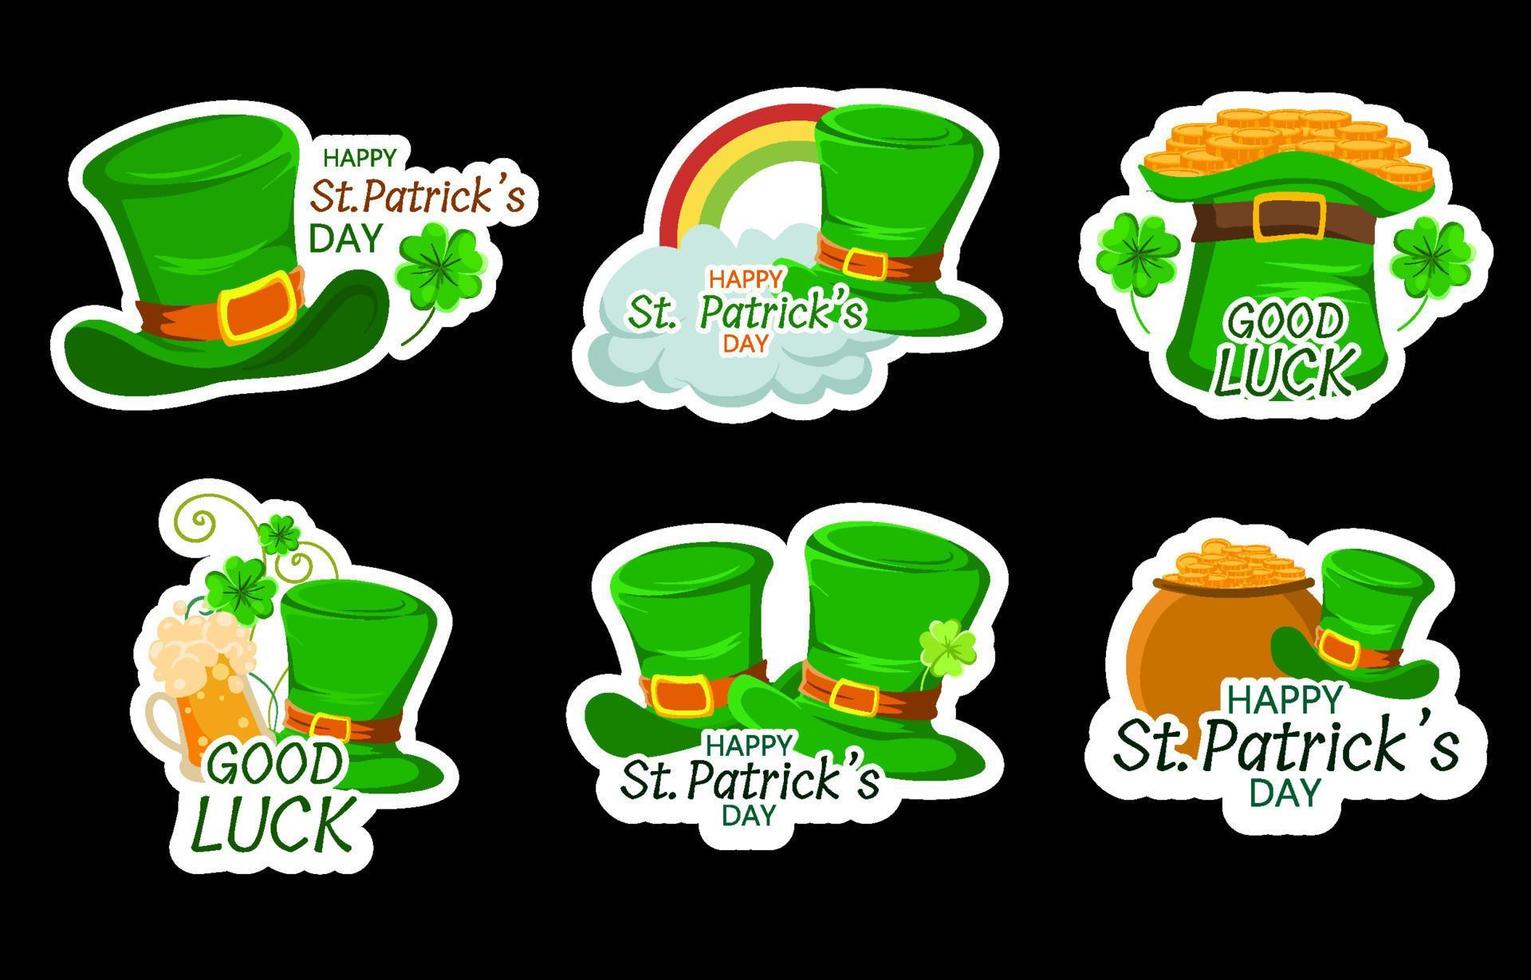 St Patrick's Day with Hat Sticker vector